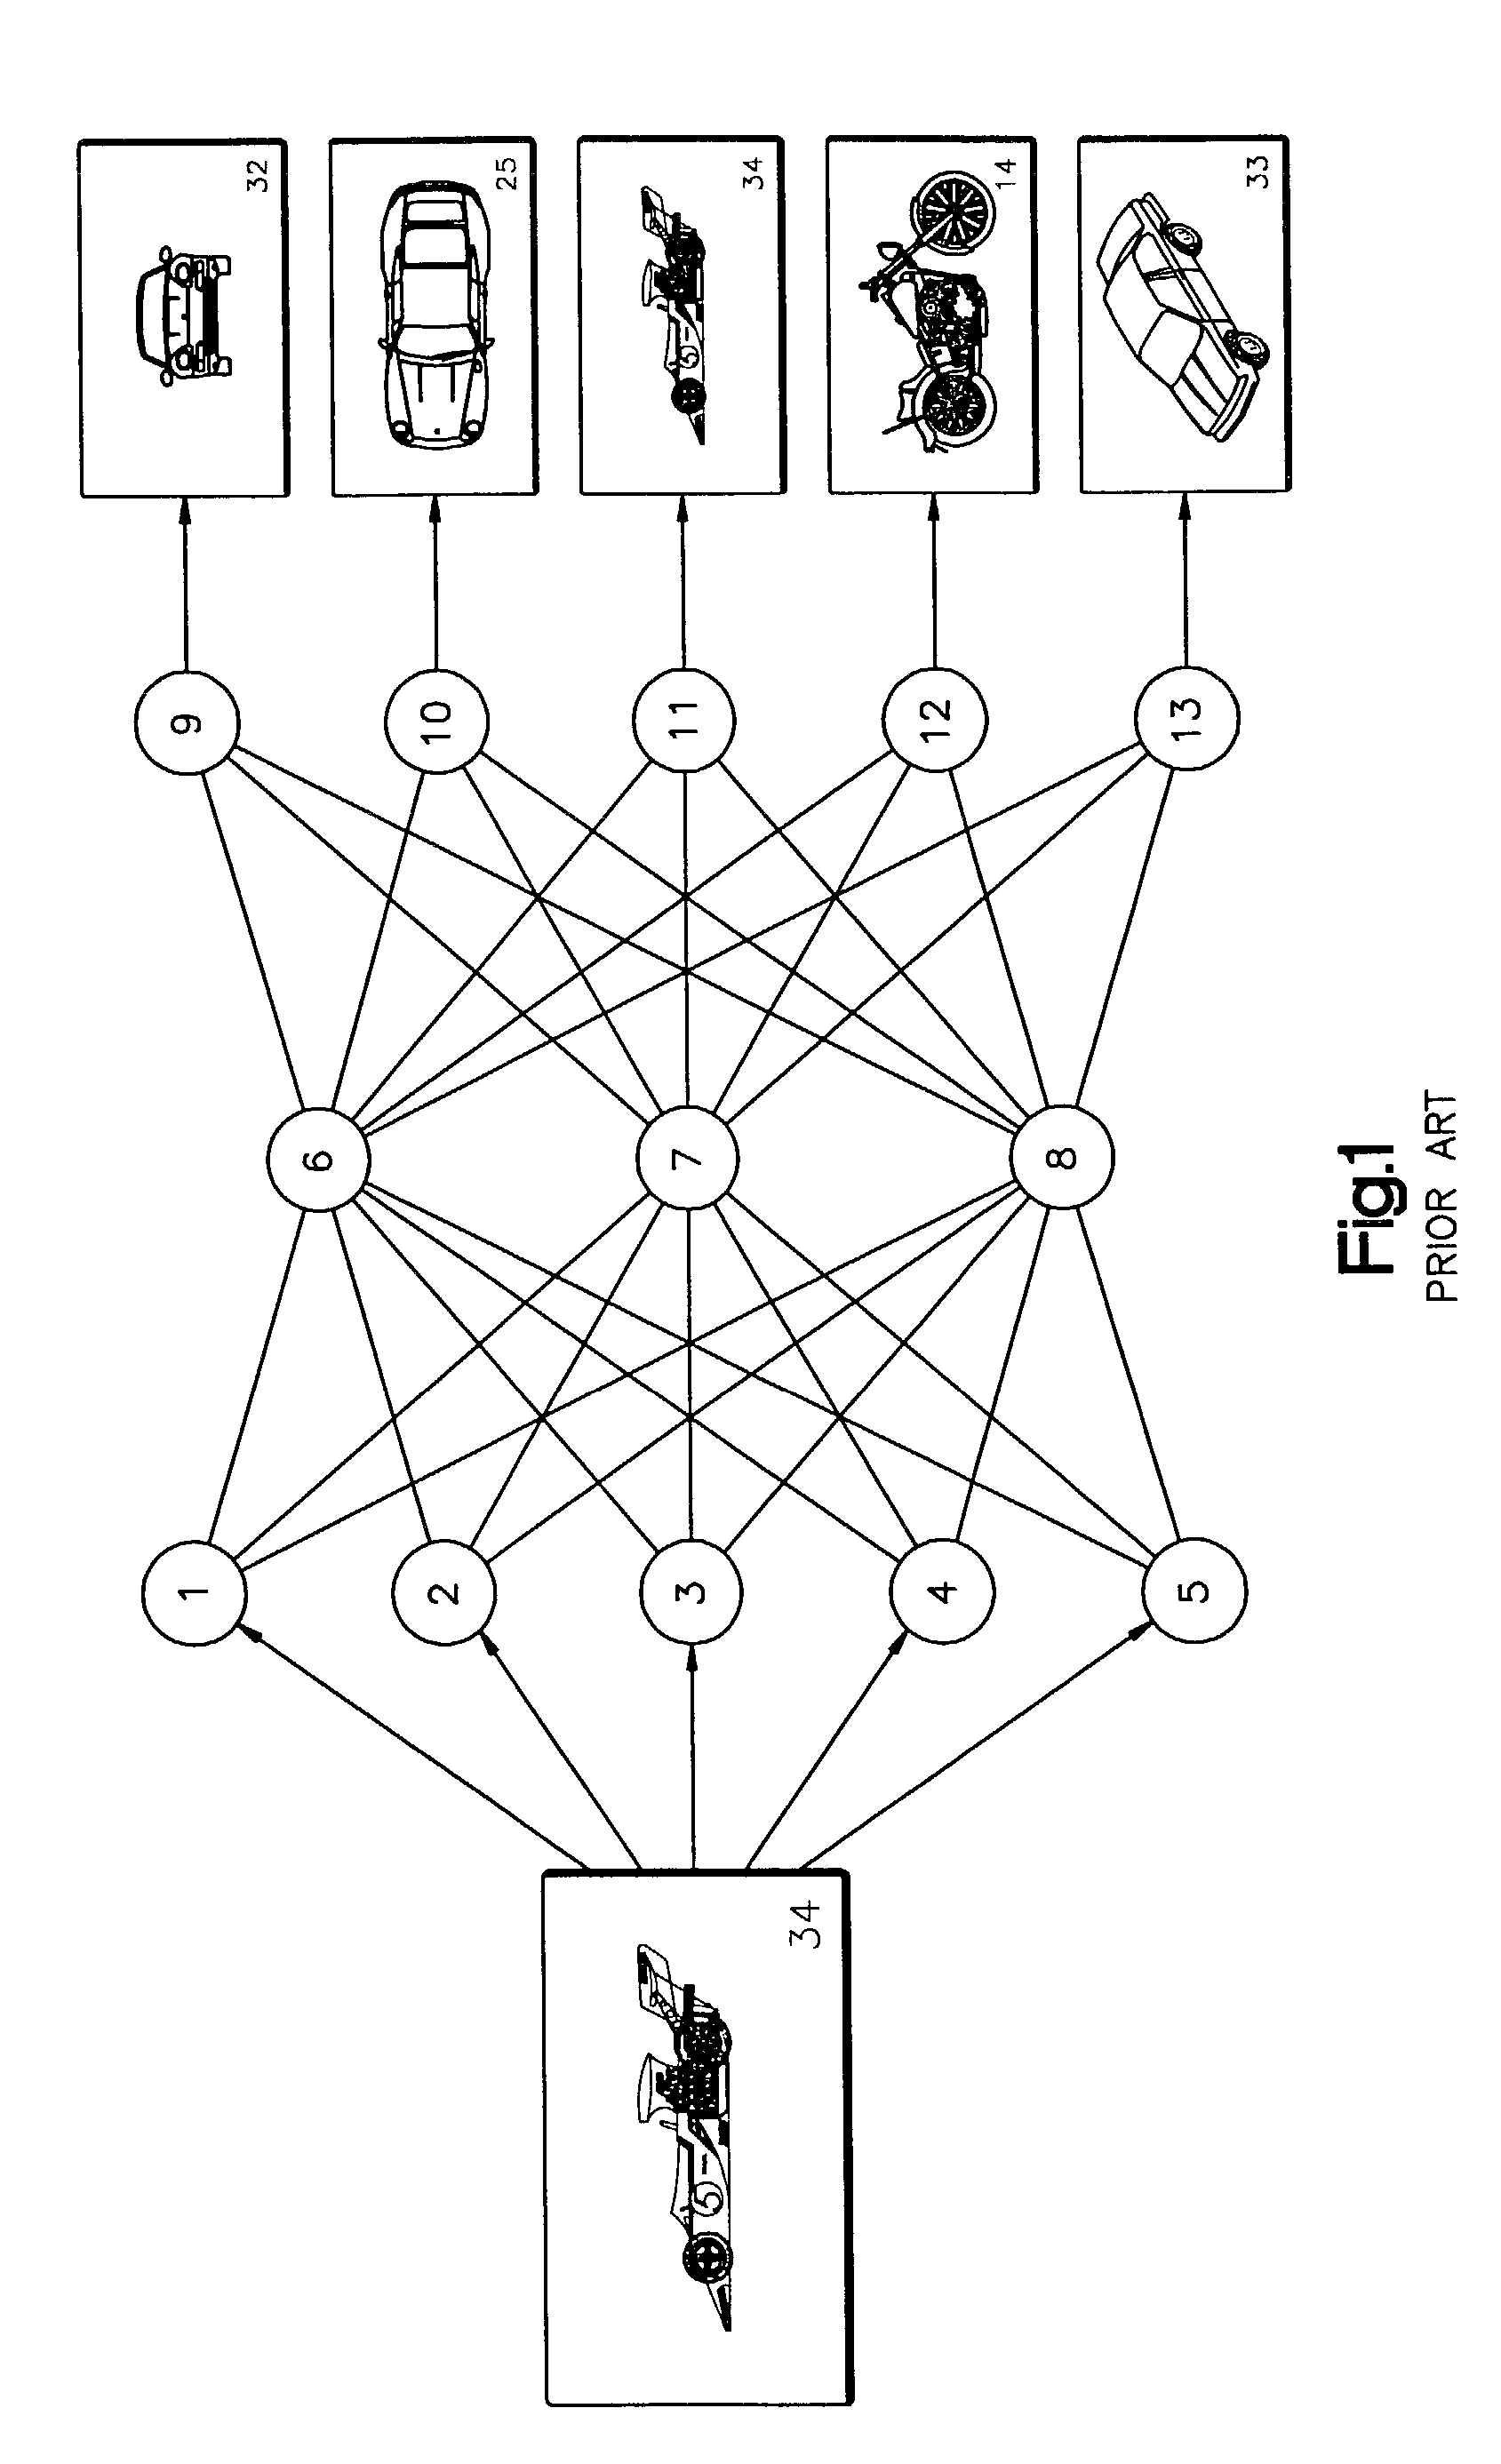 Method and computer program product for identifying output classes with multi-modal dispersion in feature space and incorporating multi-modal structure into a pattern recognition system